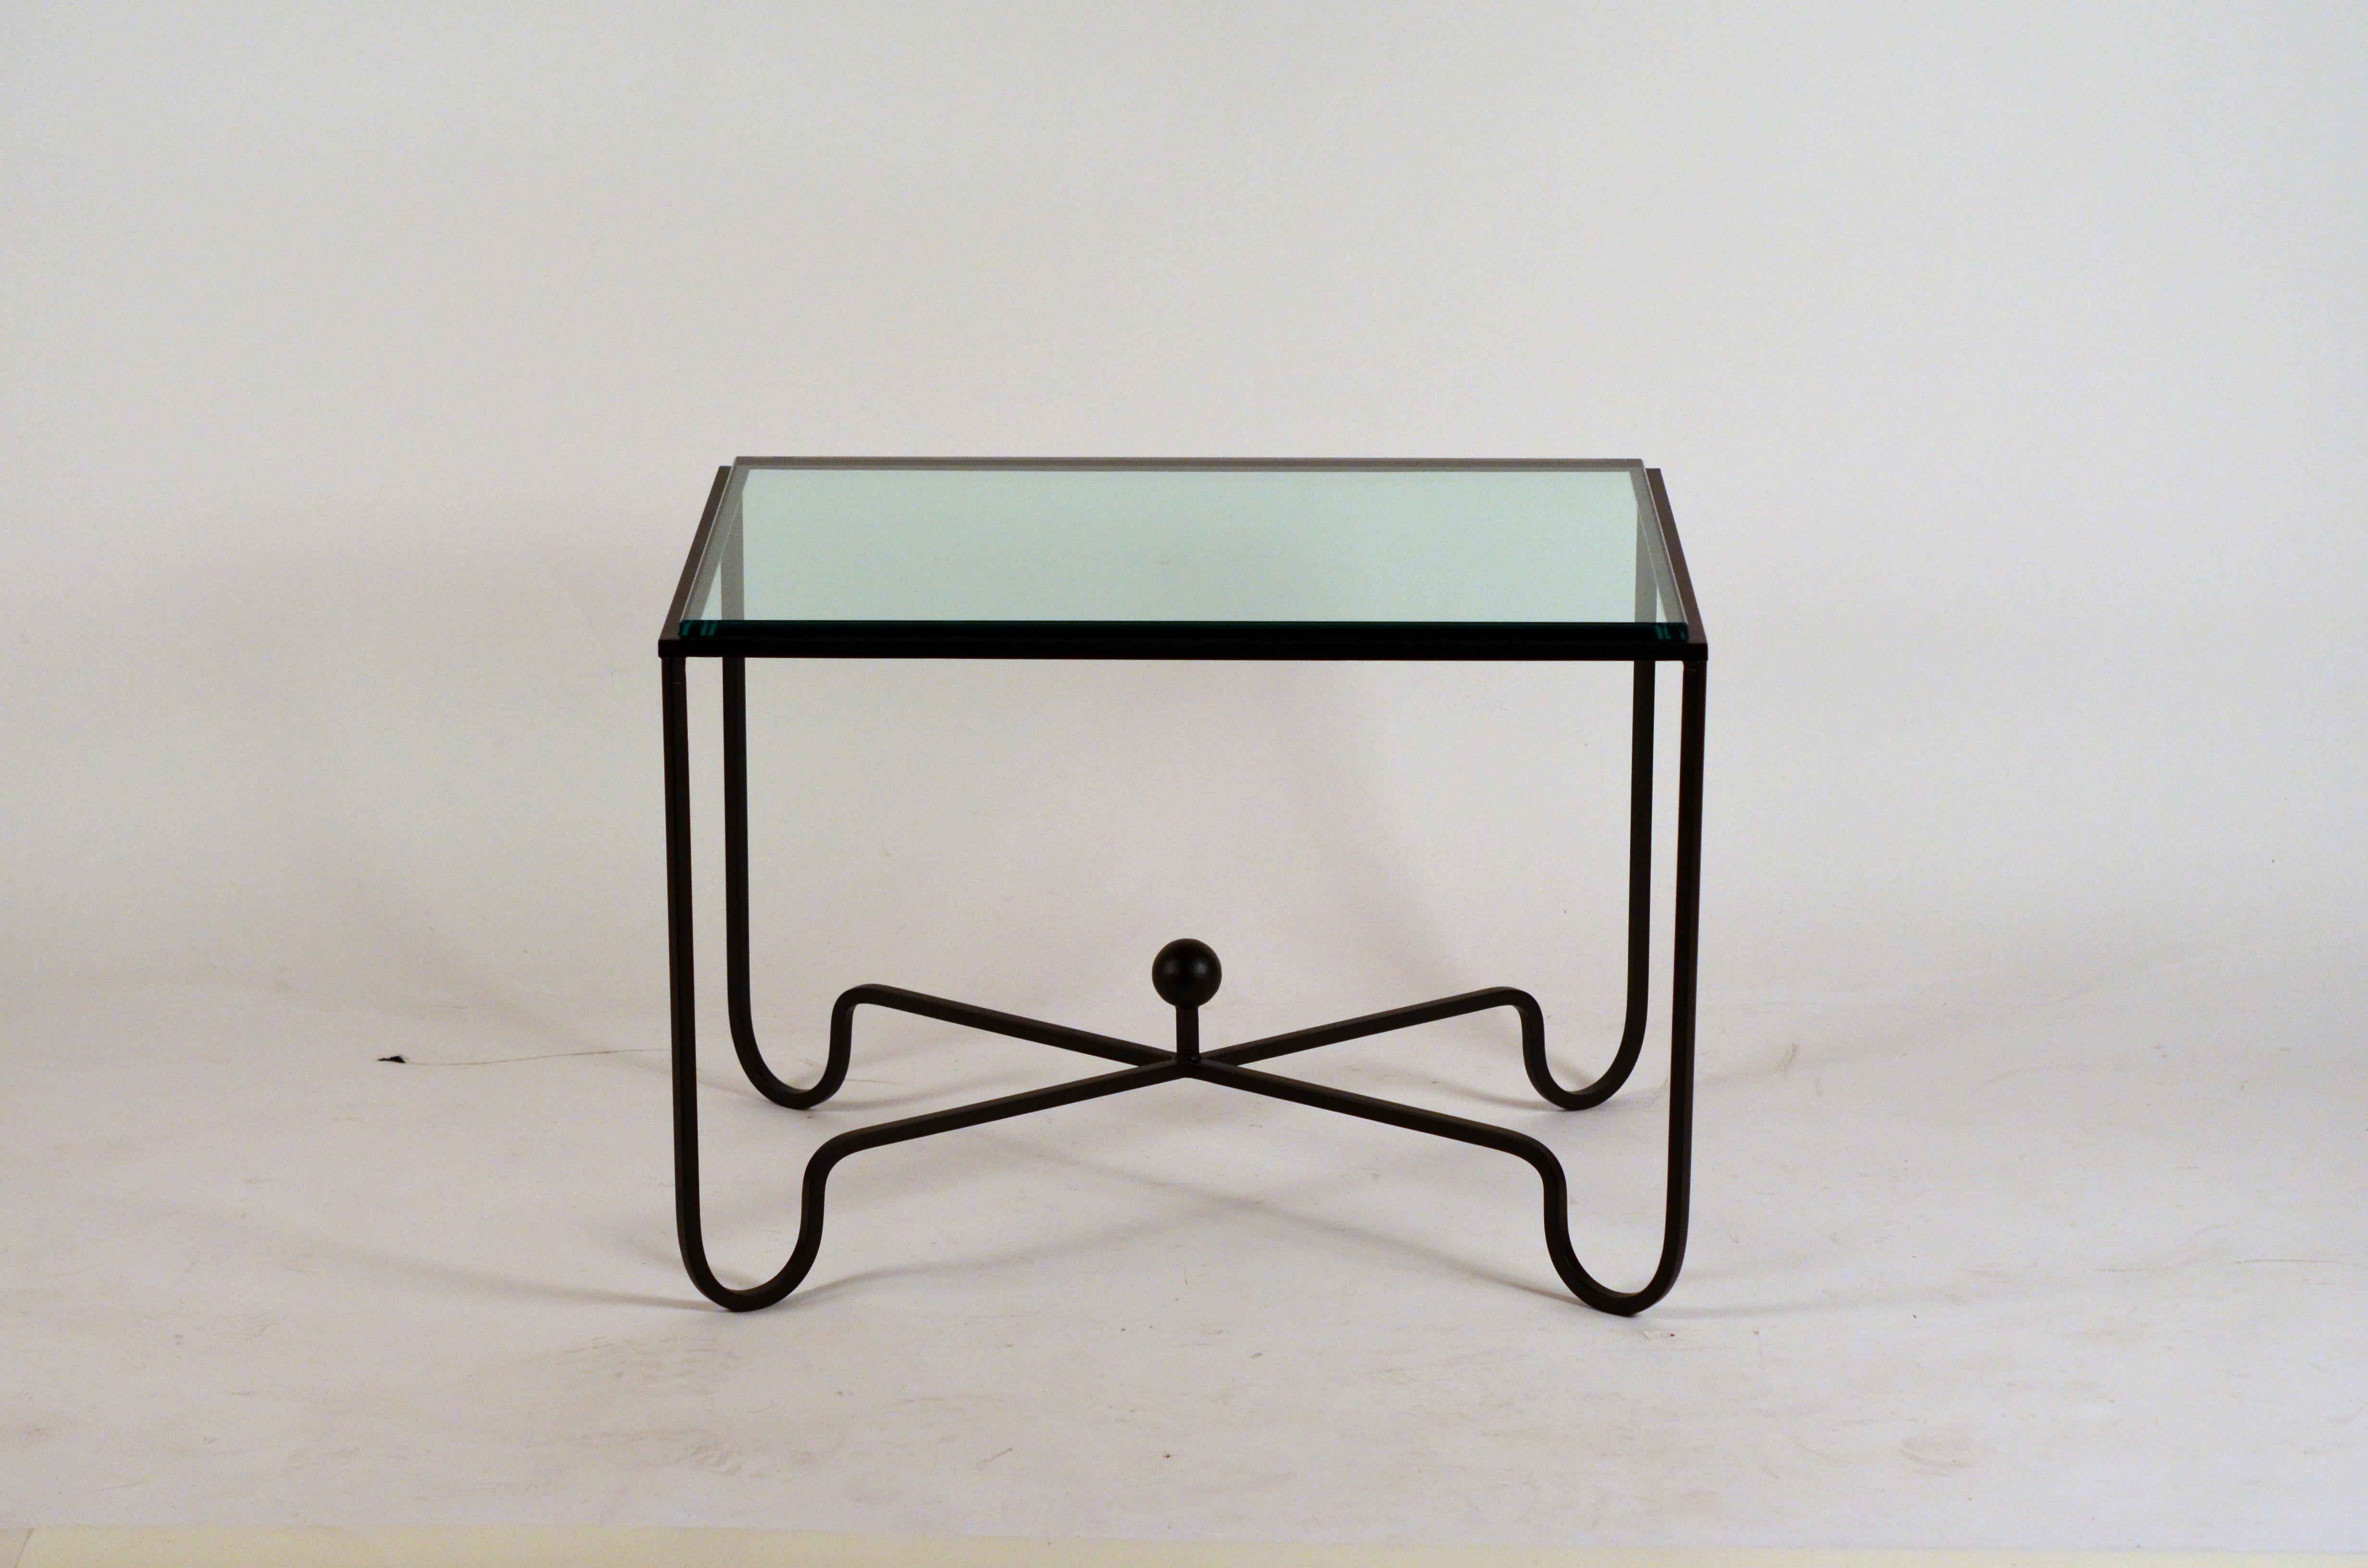 Chic Blackened Steel and Glass 'Entretoise' Side Table by Design Frères For Sale 1